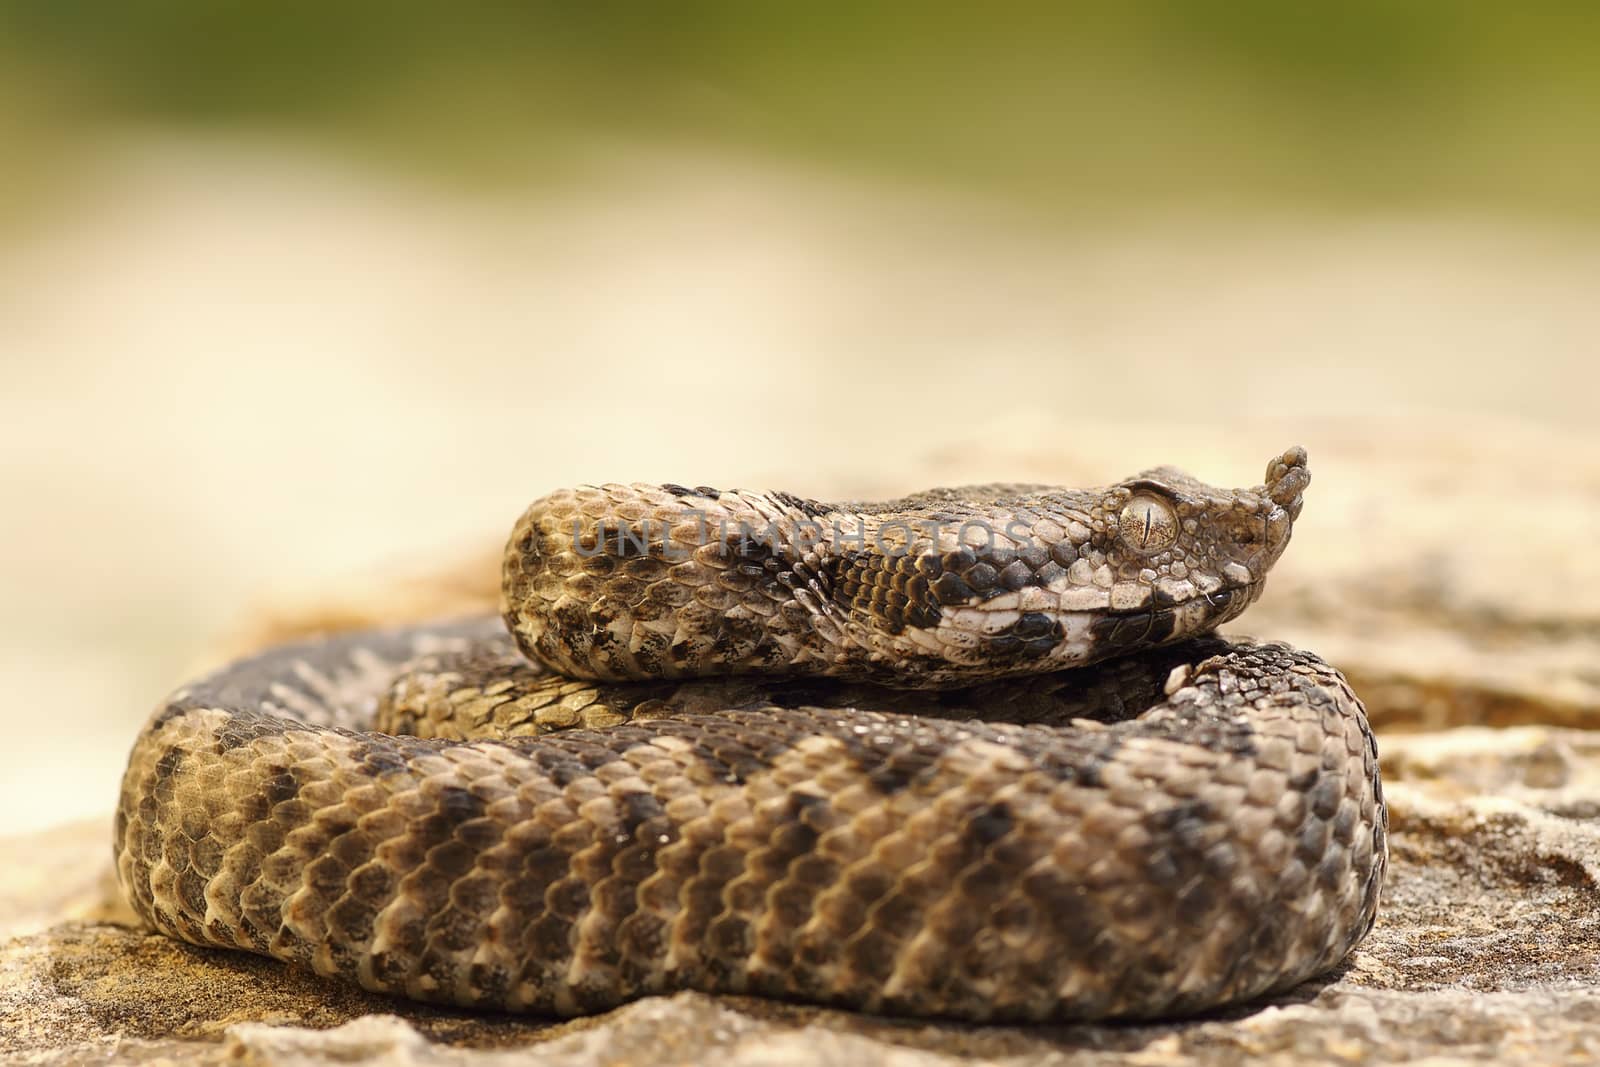 poisonous snake youngster basking on stone by taviphoto